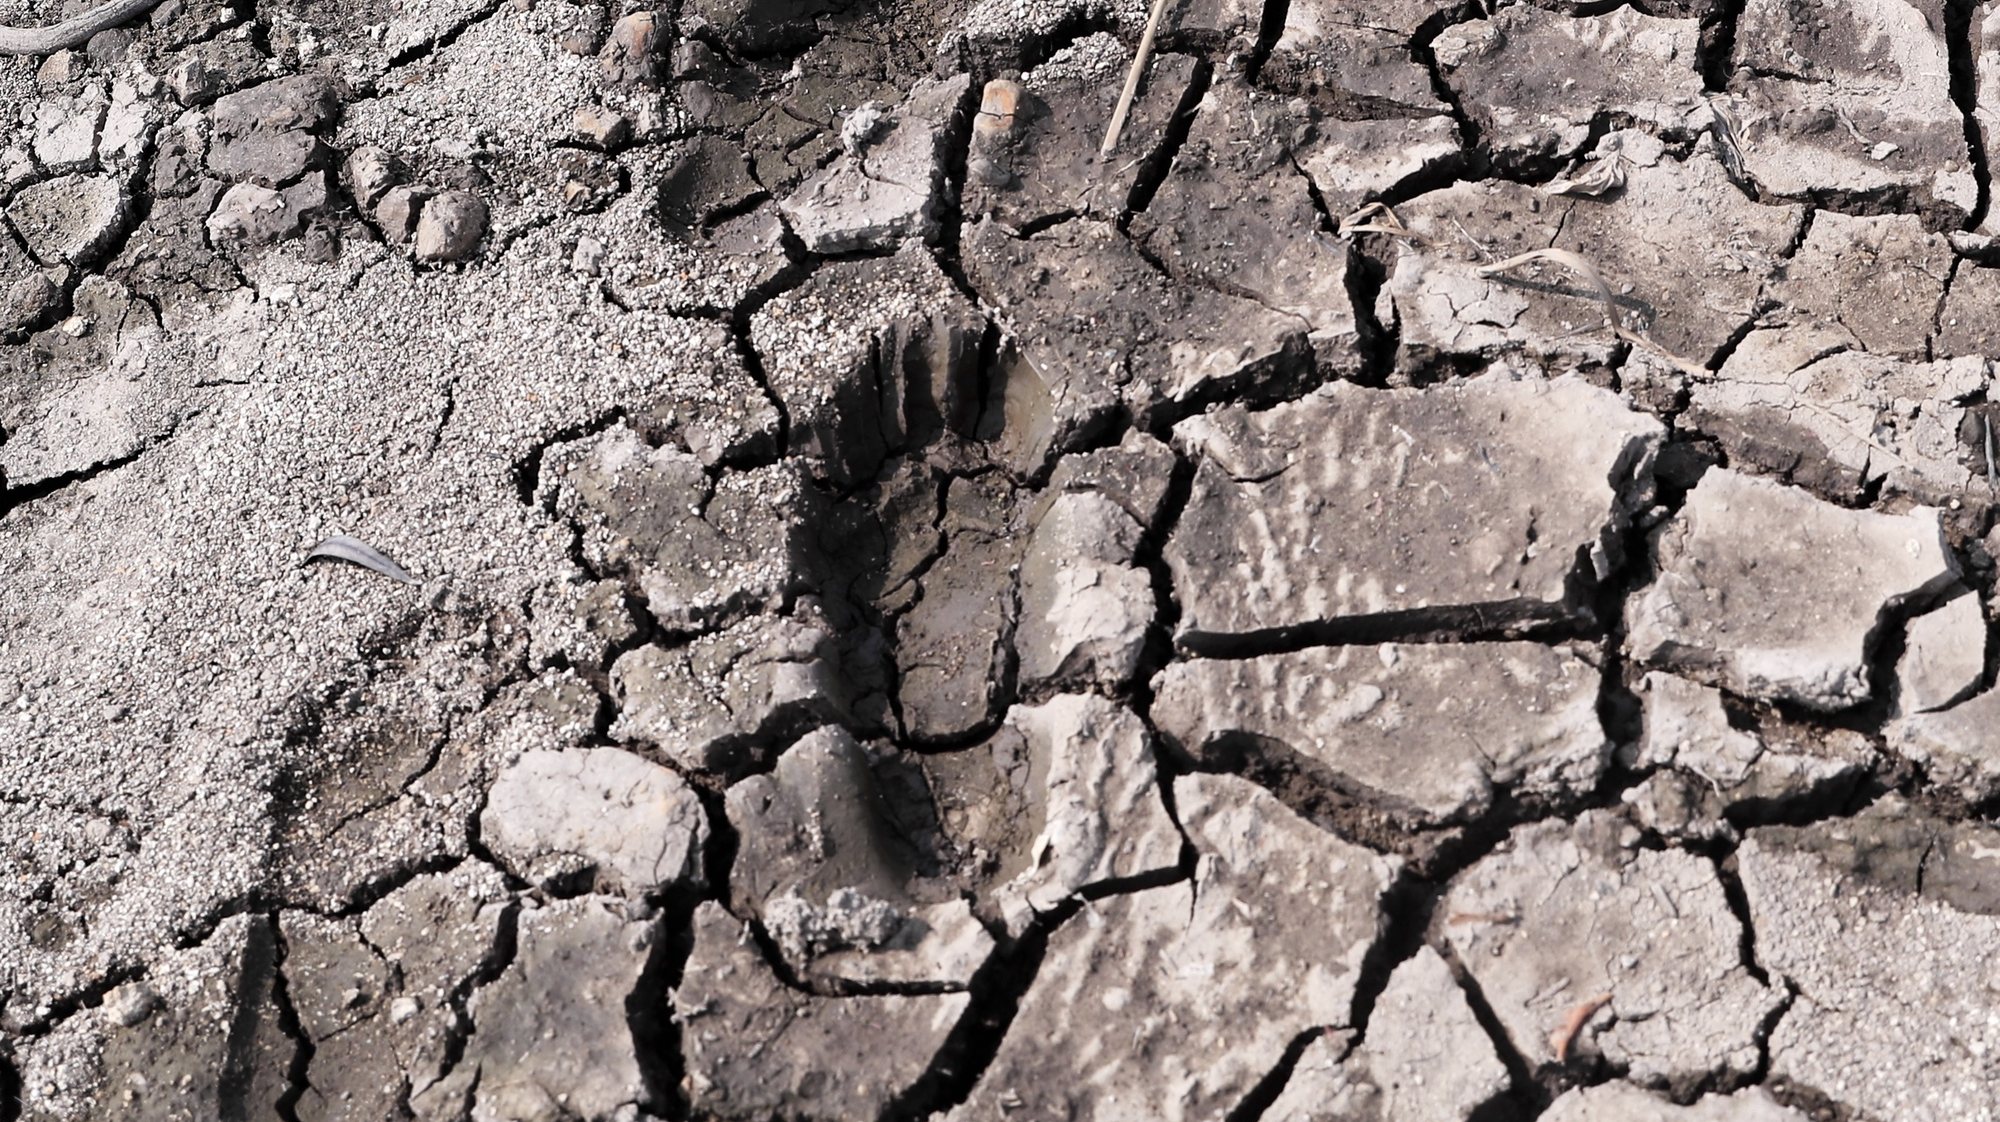 epa09876874 A footprint on the dry soil where the flow of the Los Laureles dam, the largest supplier of water for Tegucigalpa and Comayaguela, has dropped, in Tegucigalpa, Honduras, 07 April 2022. Climate change increases the conditions for forest fires in Honduras, where this year they have affected nearly 15,000 hectares, endangering the supply of water for human consumption and productive activity, an expert told Efe.  EPA/Gustavo Amador